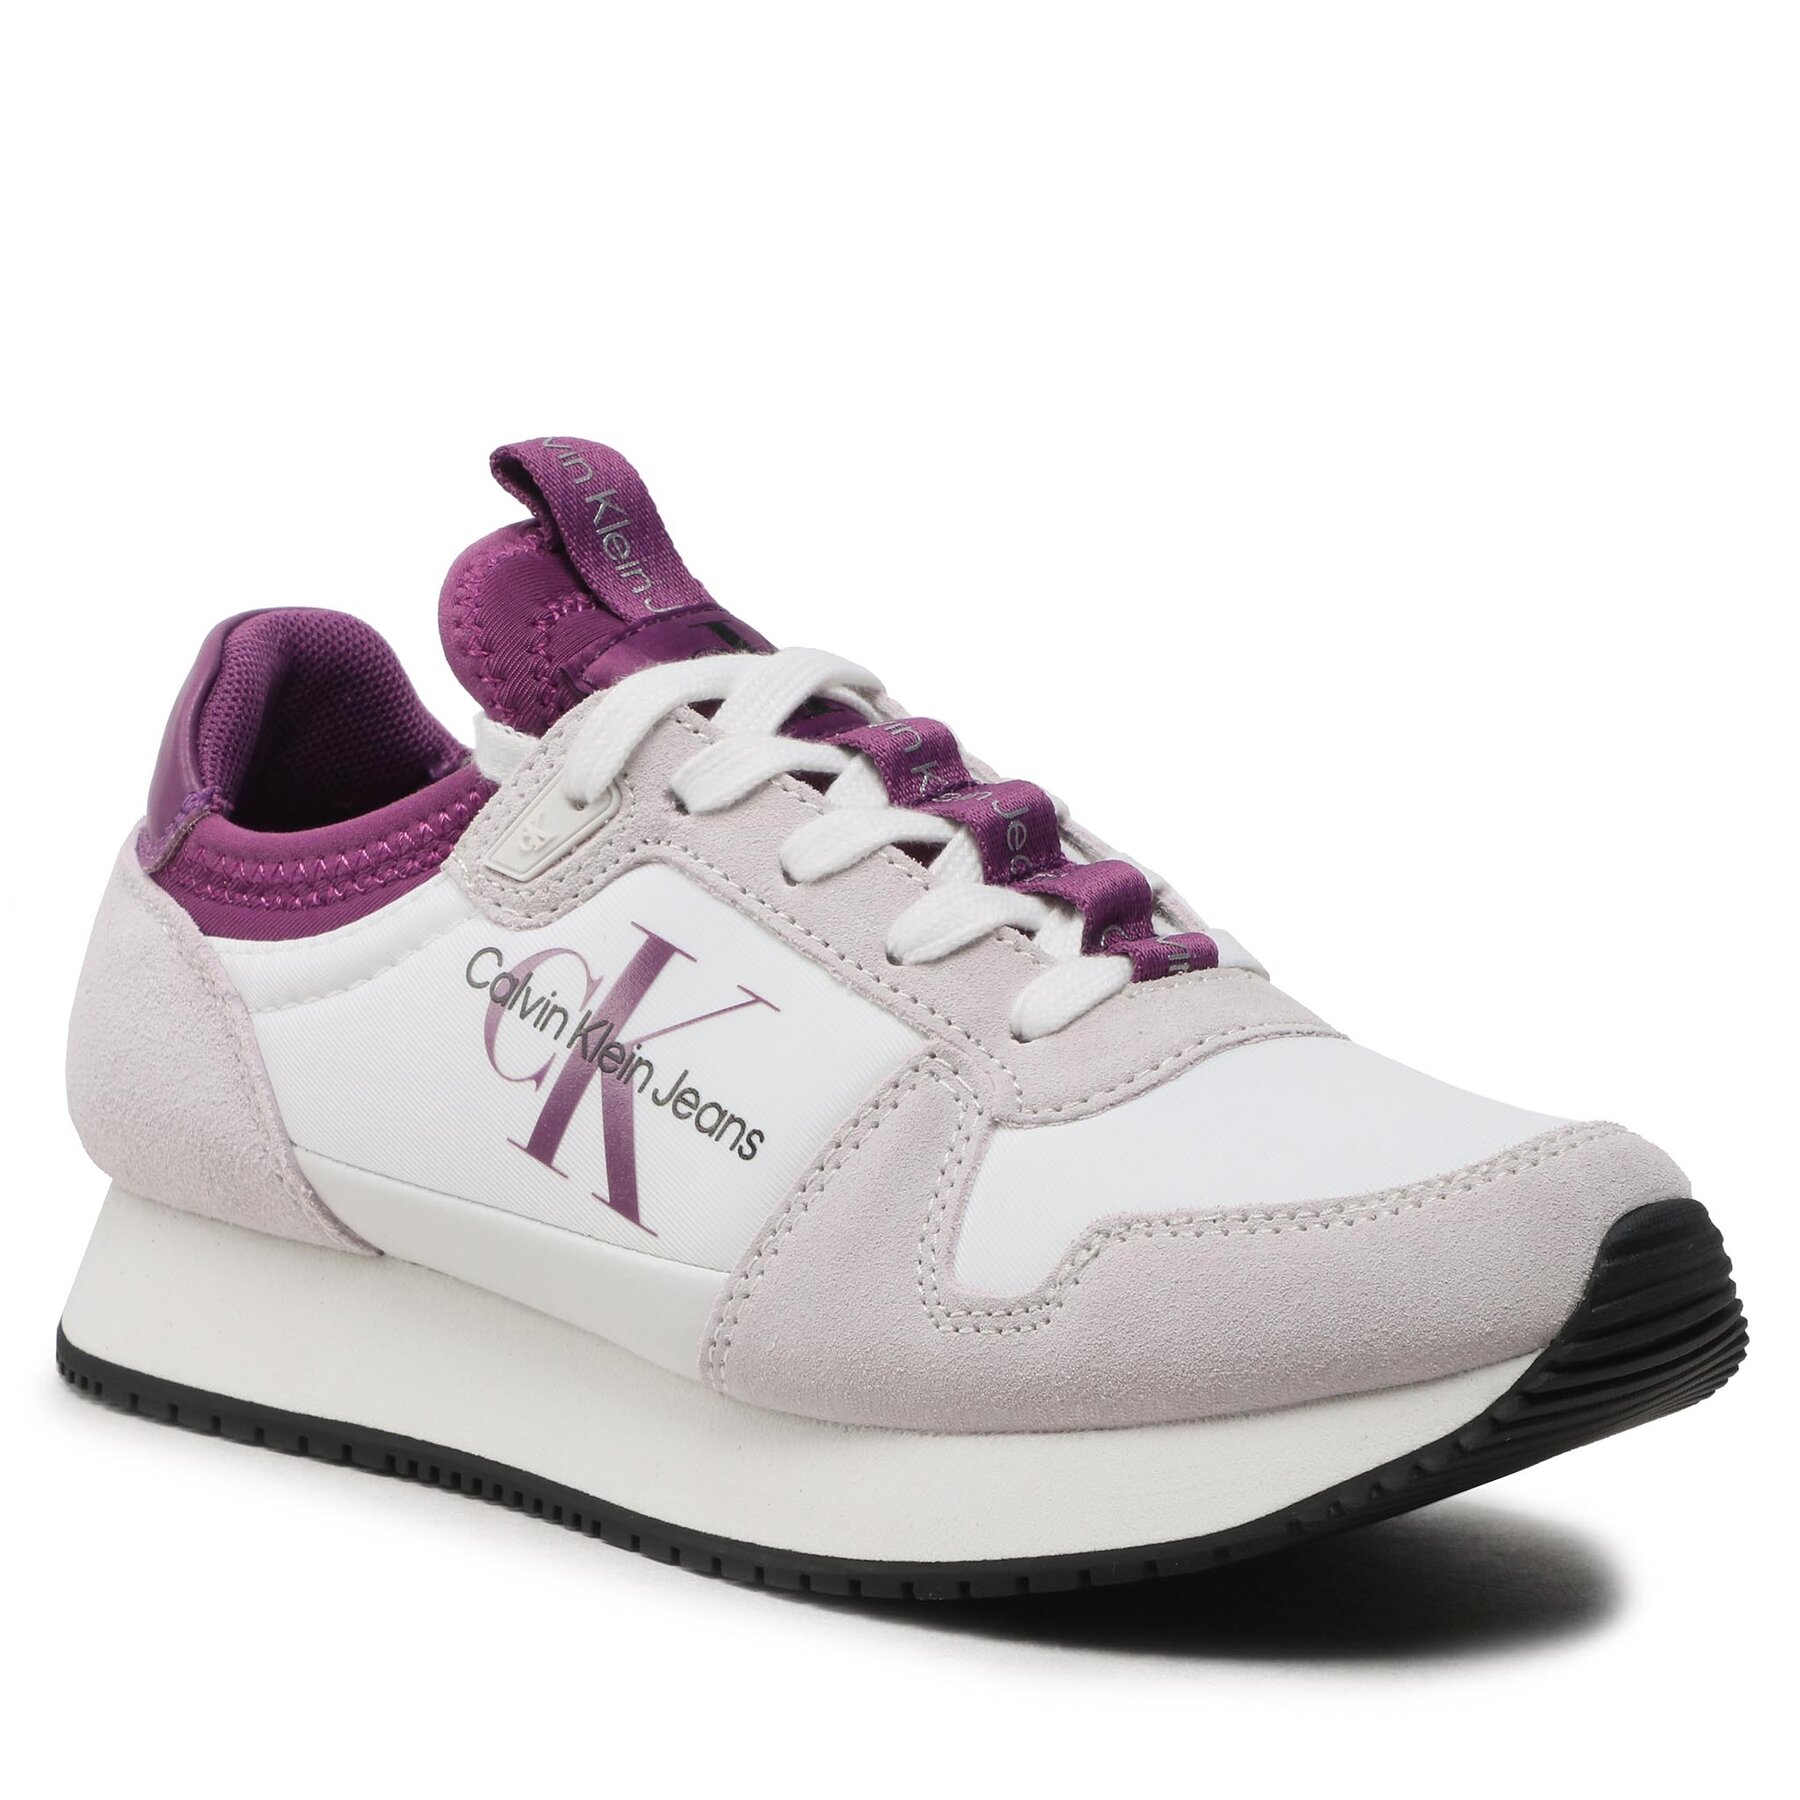 Sneakers Calvin Klein Jeans Runner Sock Laceup Ny-Lth W YW0YW00840 White/Ghost Grey/Amethyst 0KB